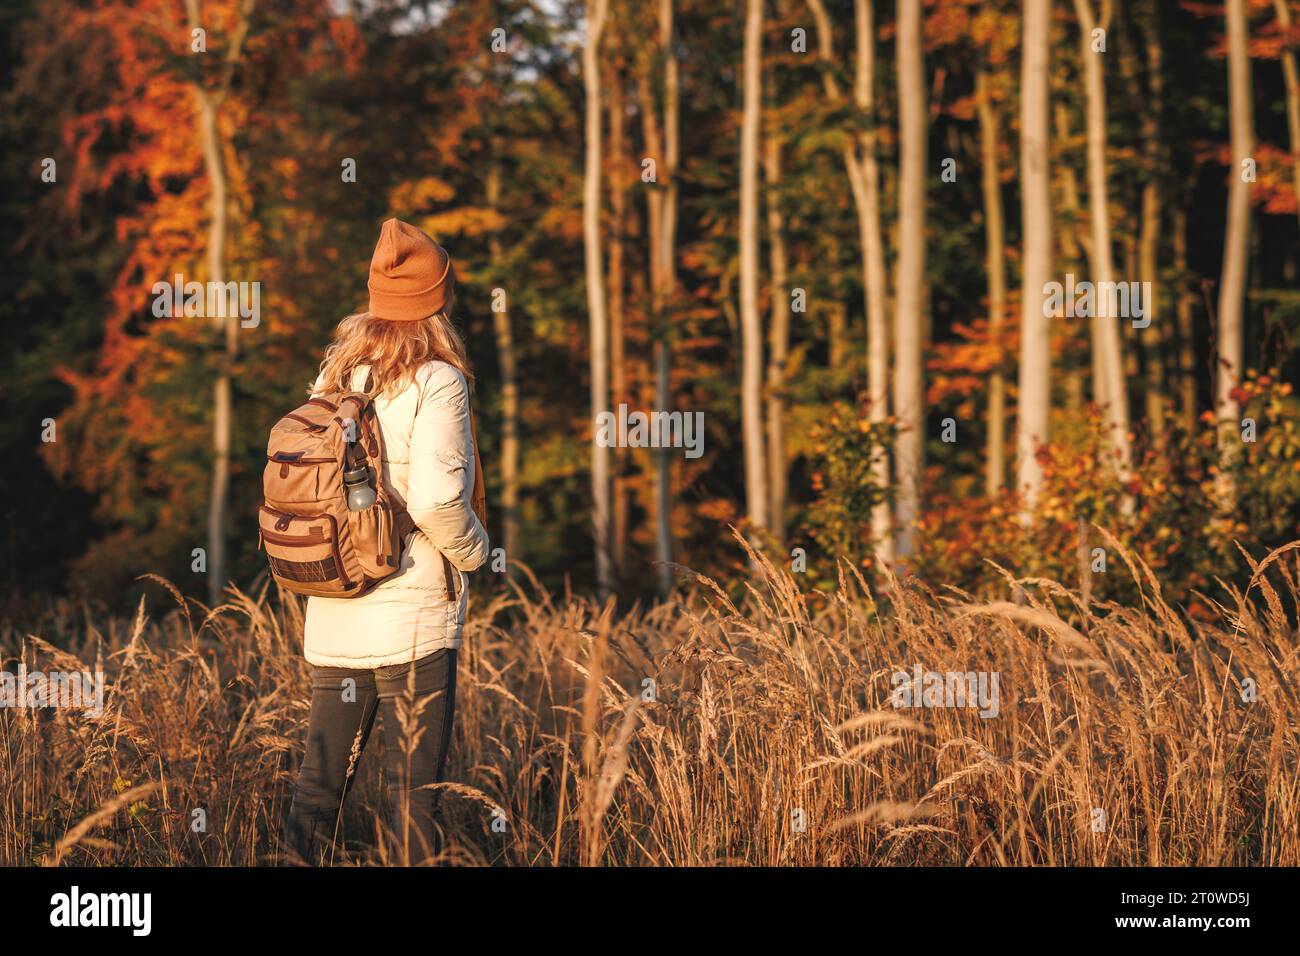 Woman with backpack, jacket and knit hat hiking in autumn forest Stock Photo